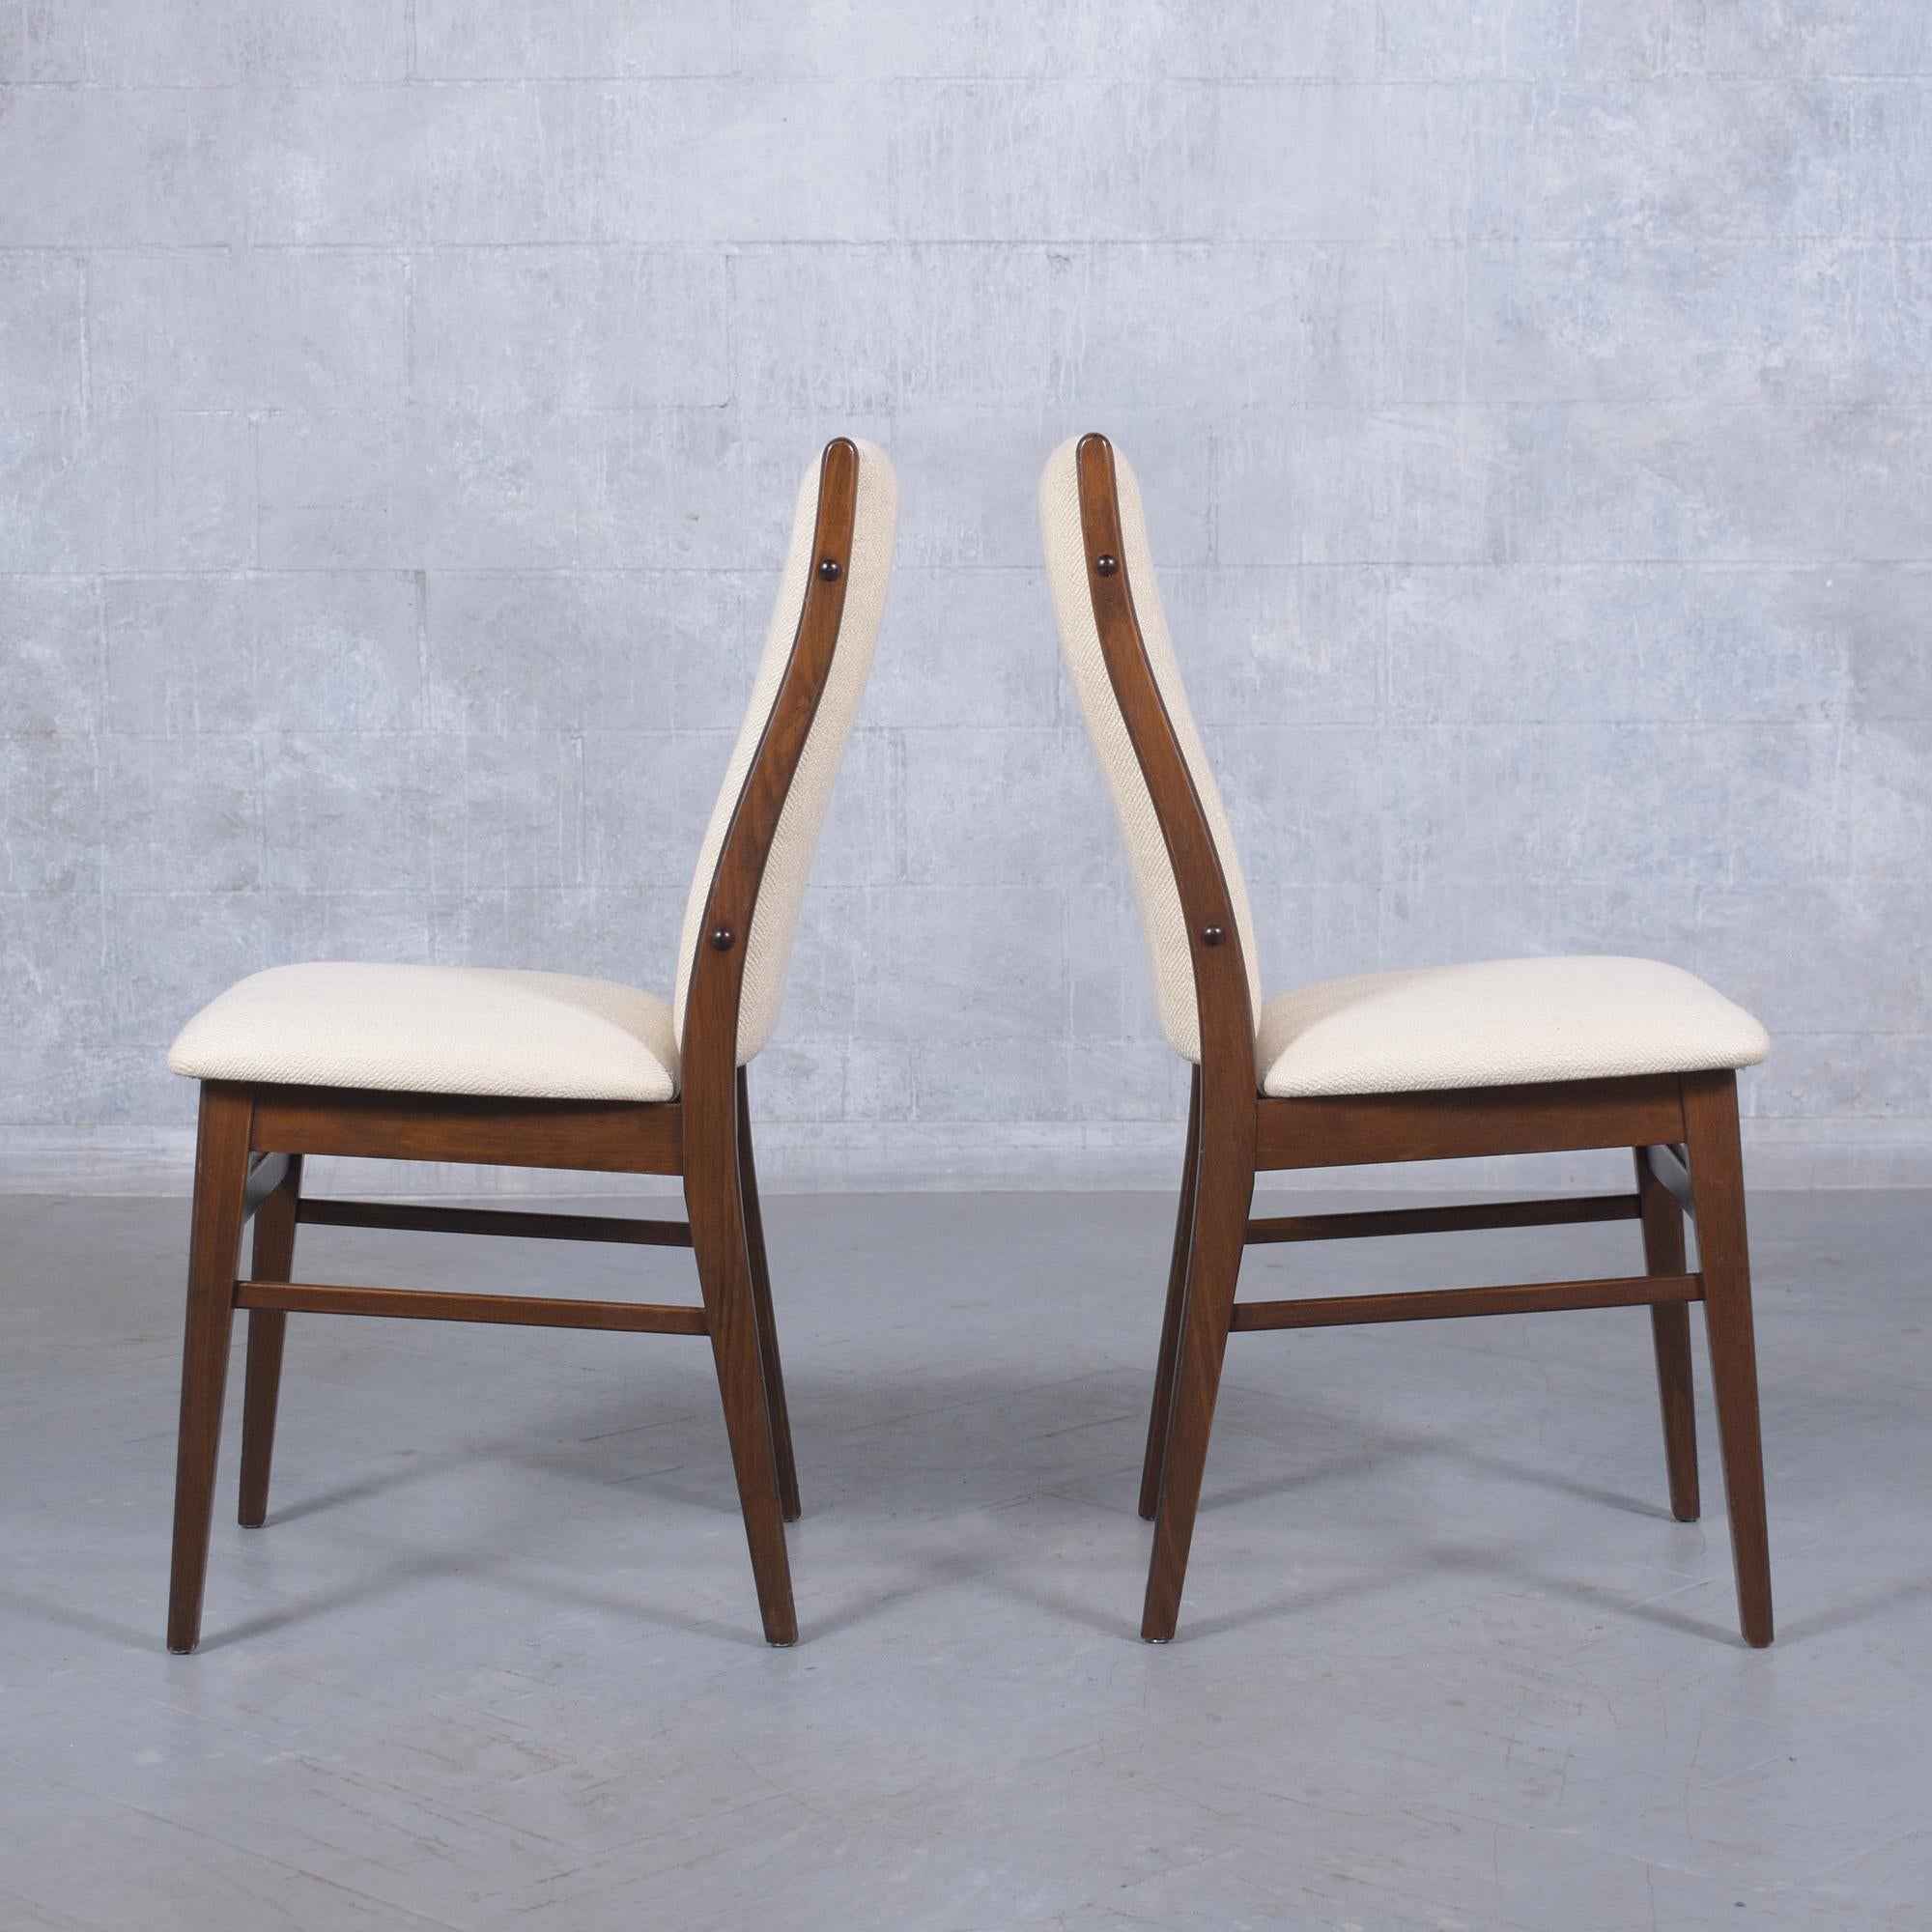 Exquisite Danish Teak Dining Chairs, Restored and Refined For Sale 5